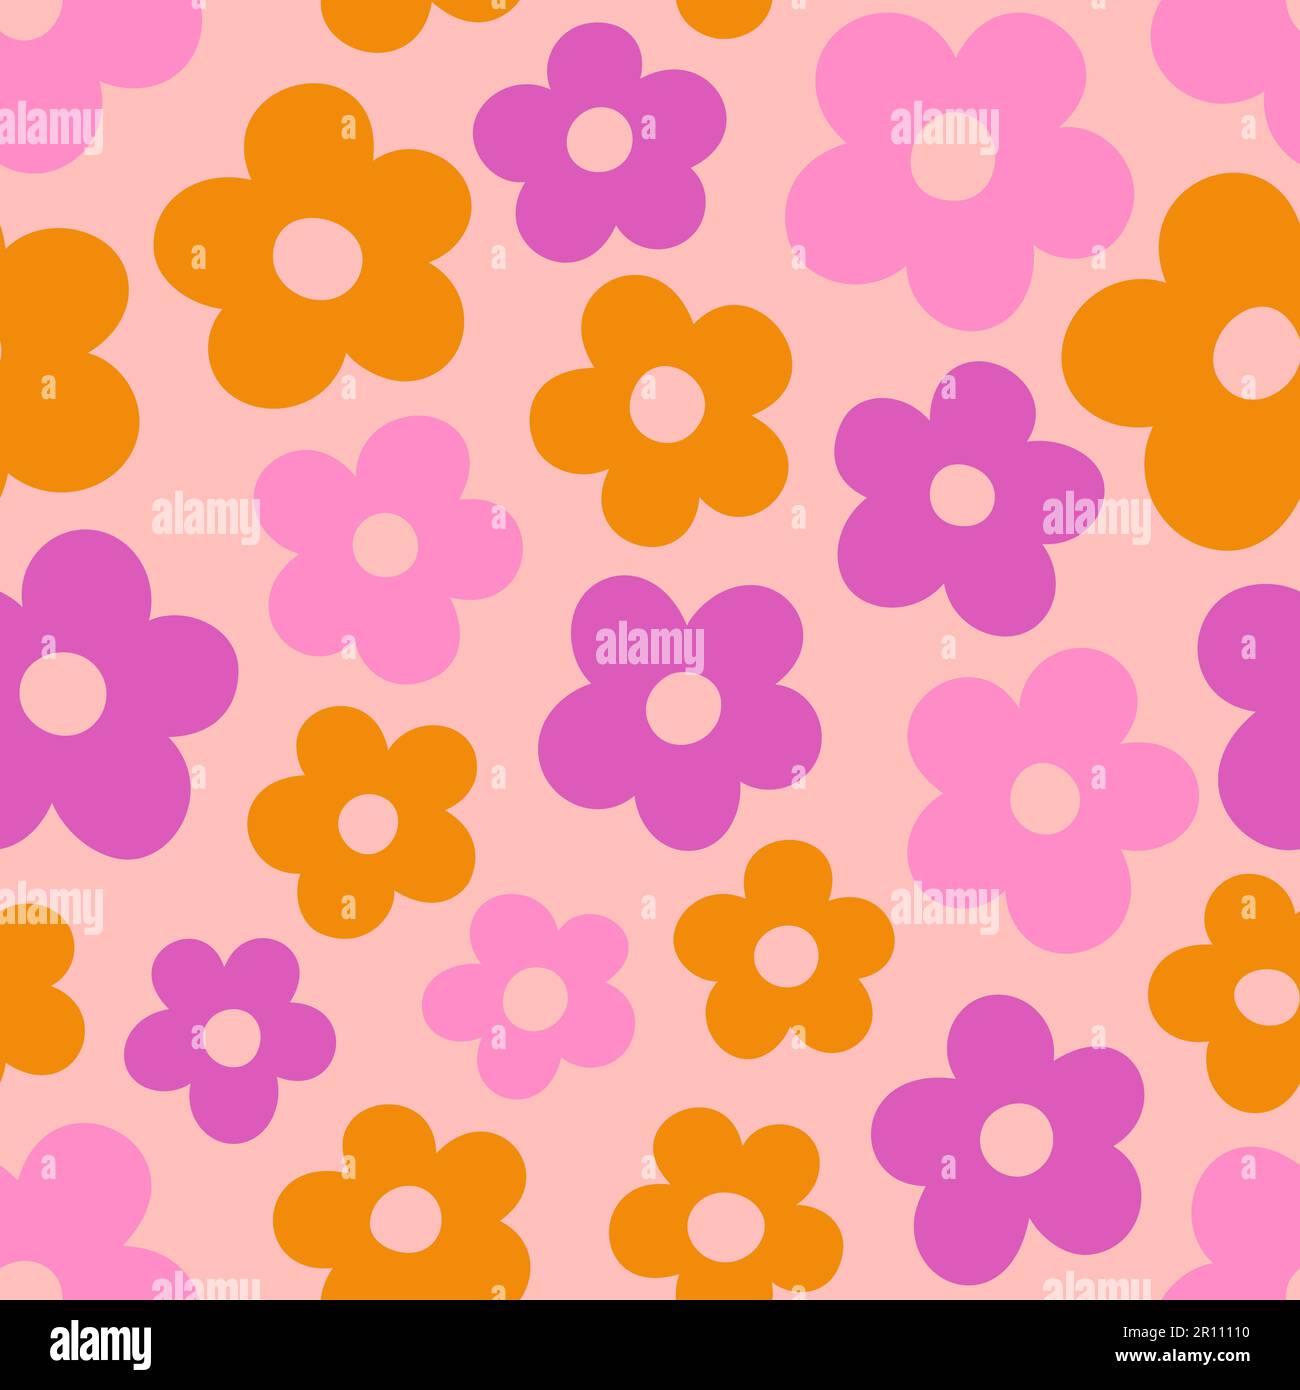 Groovy Daisy Flowers Seamless Pattern. Floral Vector Background in 1970s Hippie Retro Style for Print on Textile, Wrapping Paper, Web Design Stock Vector